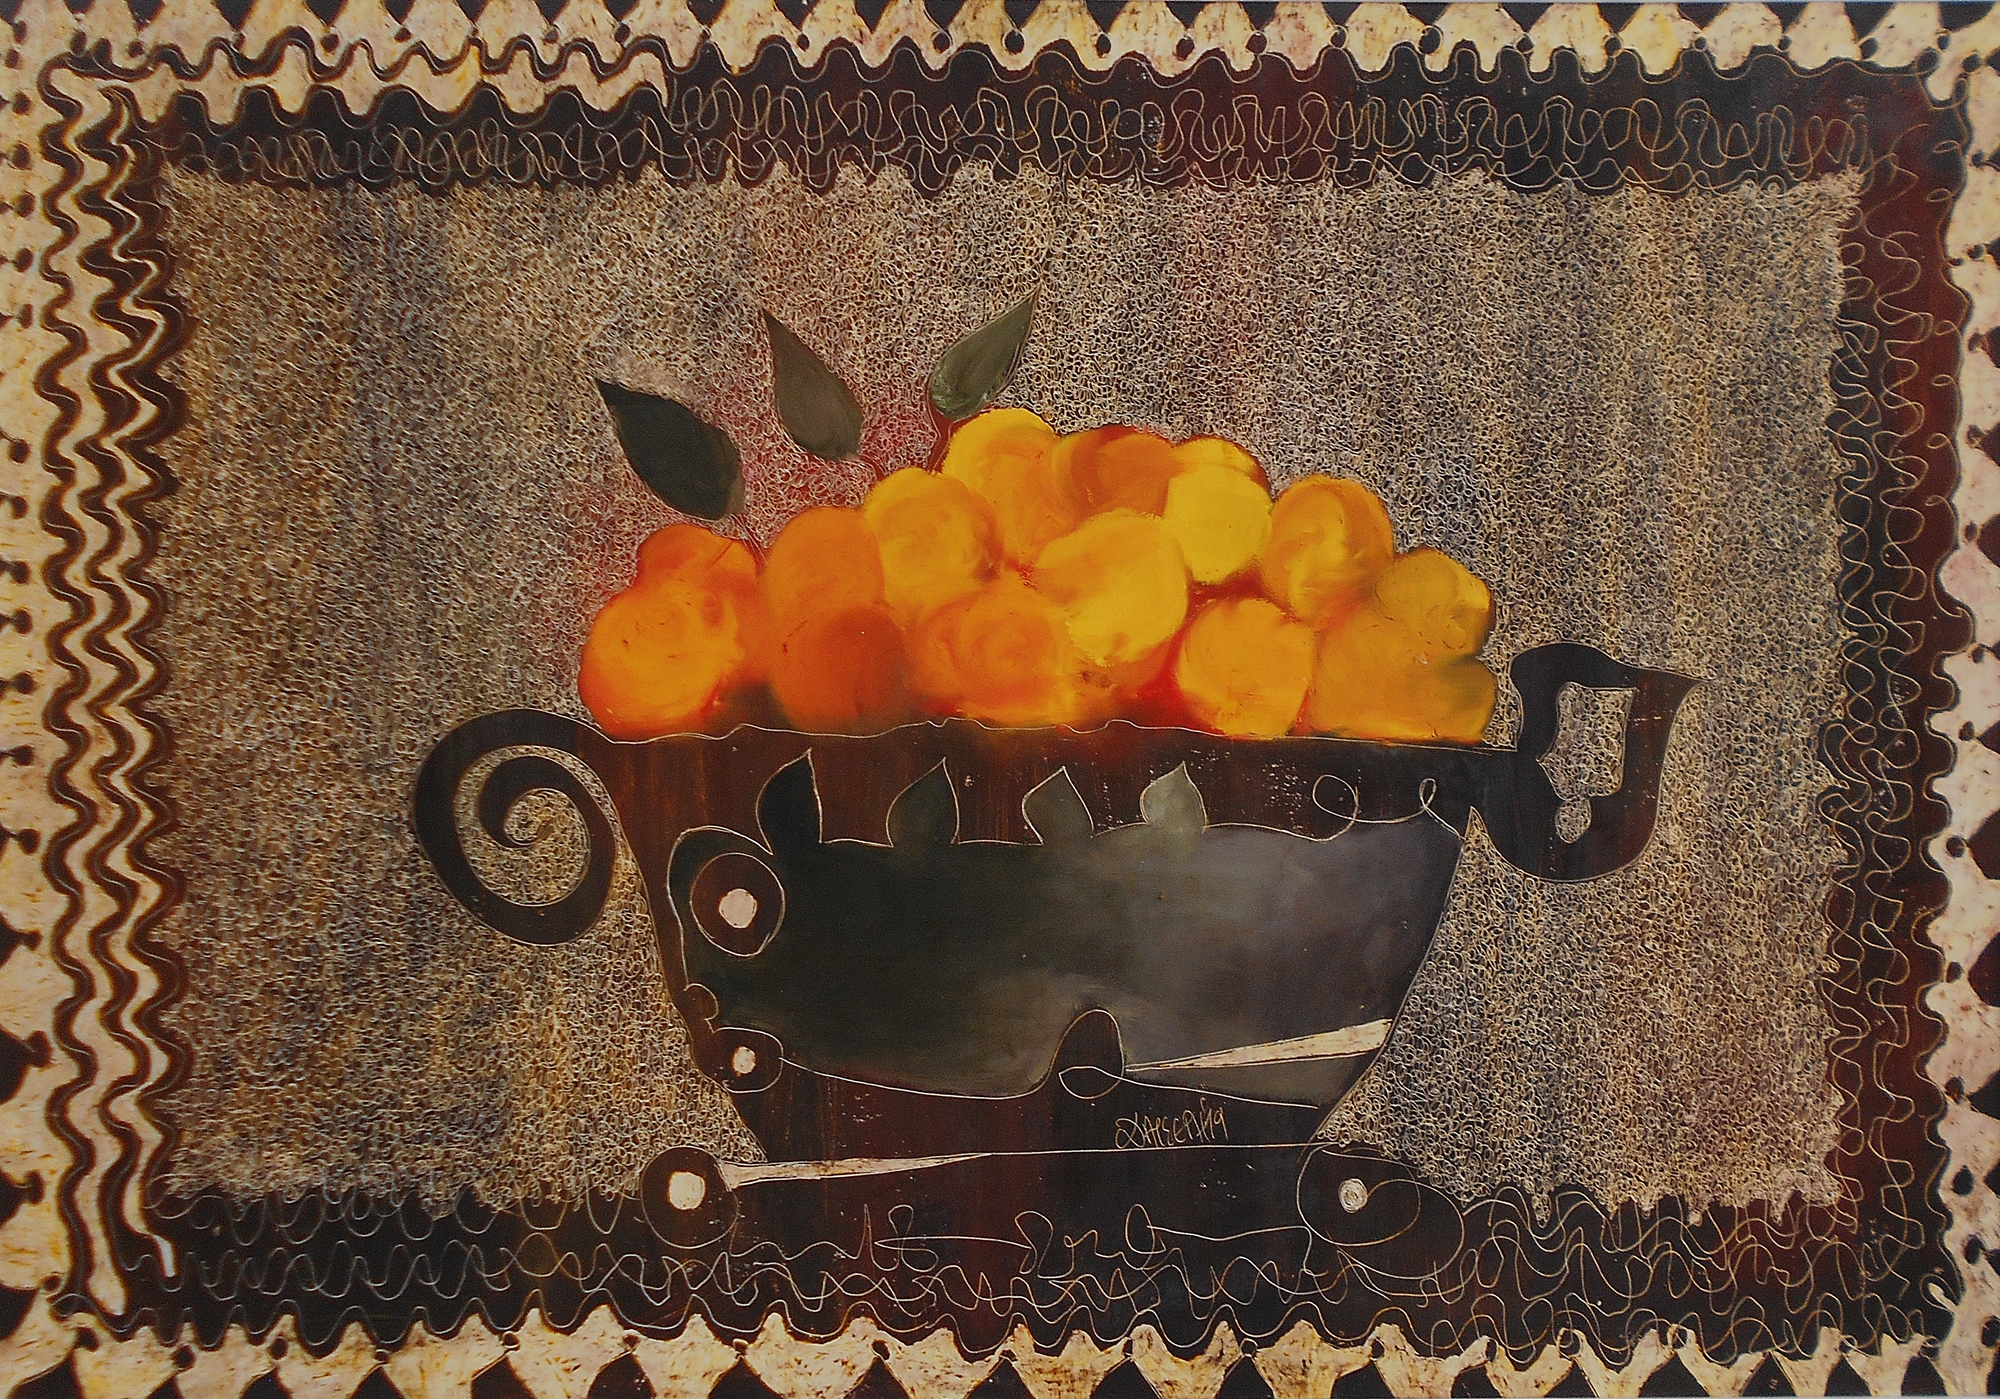 5.Still life with oranges, 100x70cm, oil colour on paper, 2019